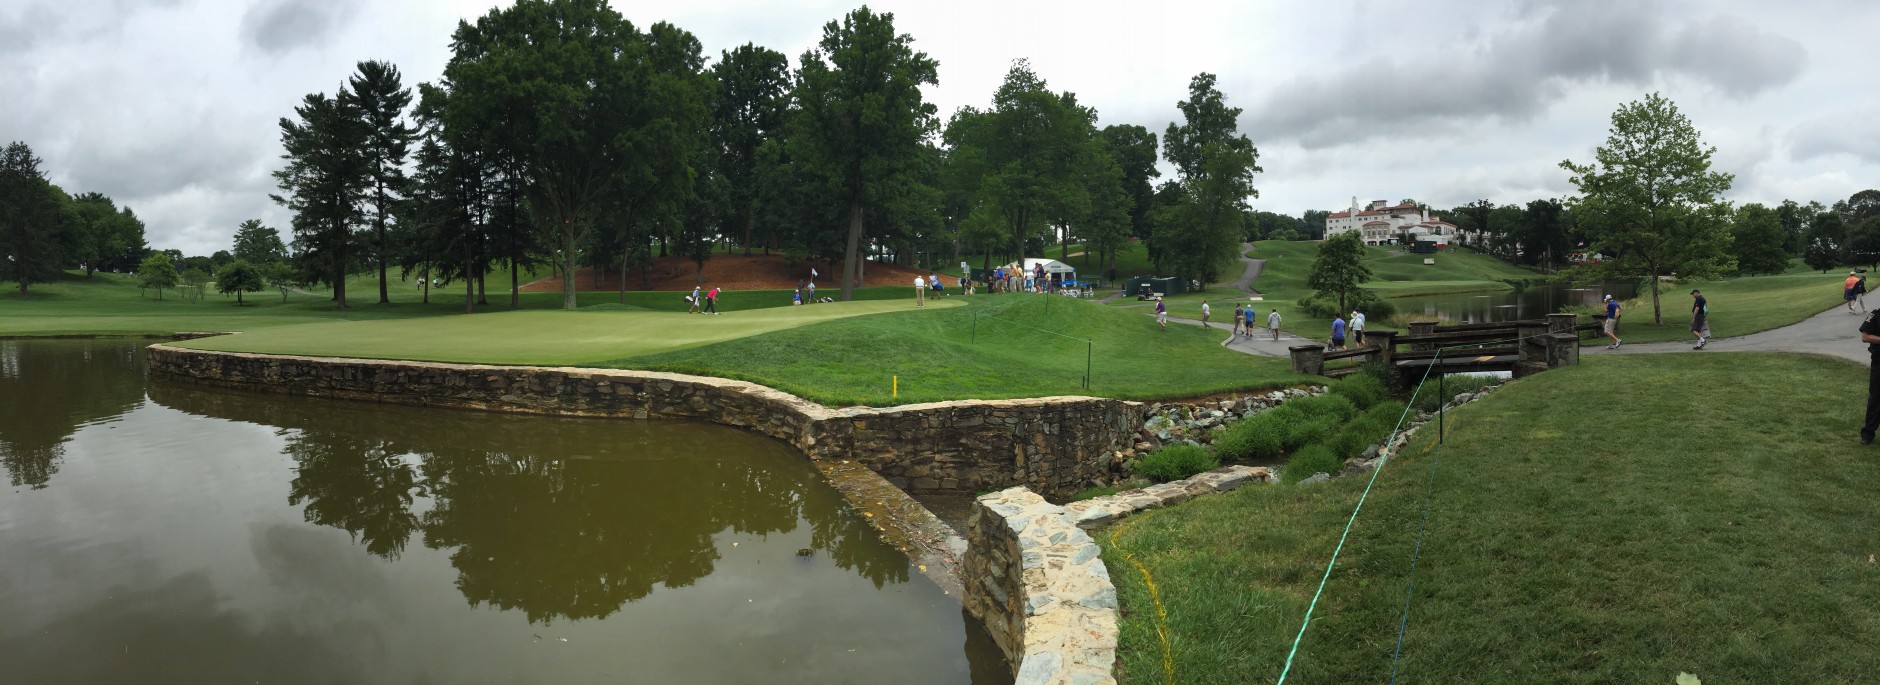 A view of the course at the Quicken Loans National Tournament on Thursday, June 23, 2016. (Courtesy Cody House)